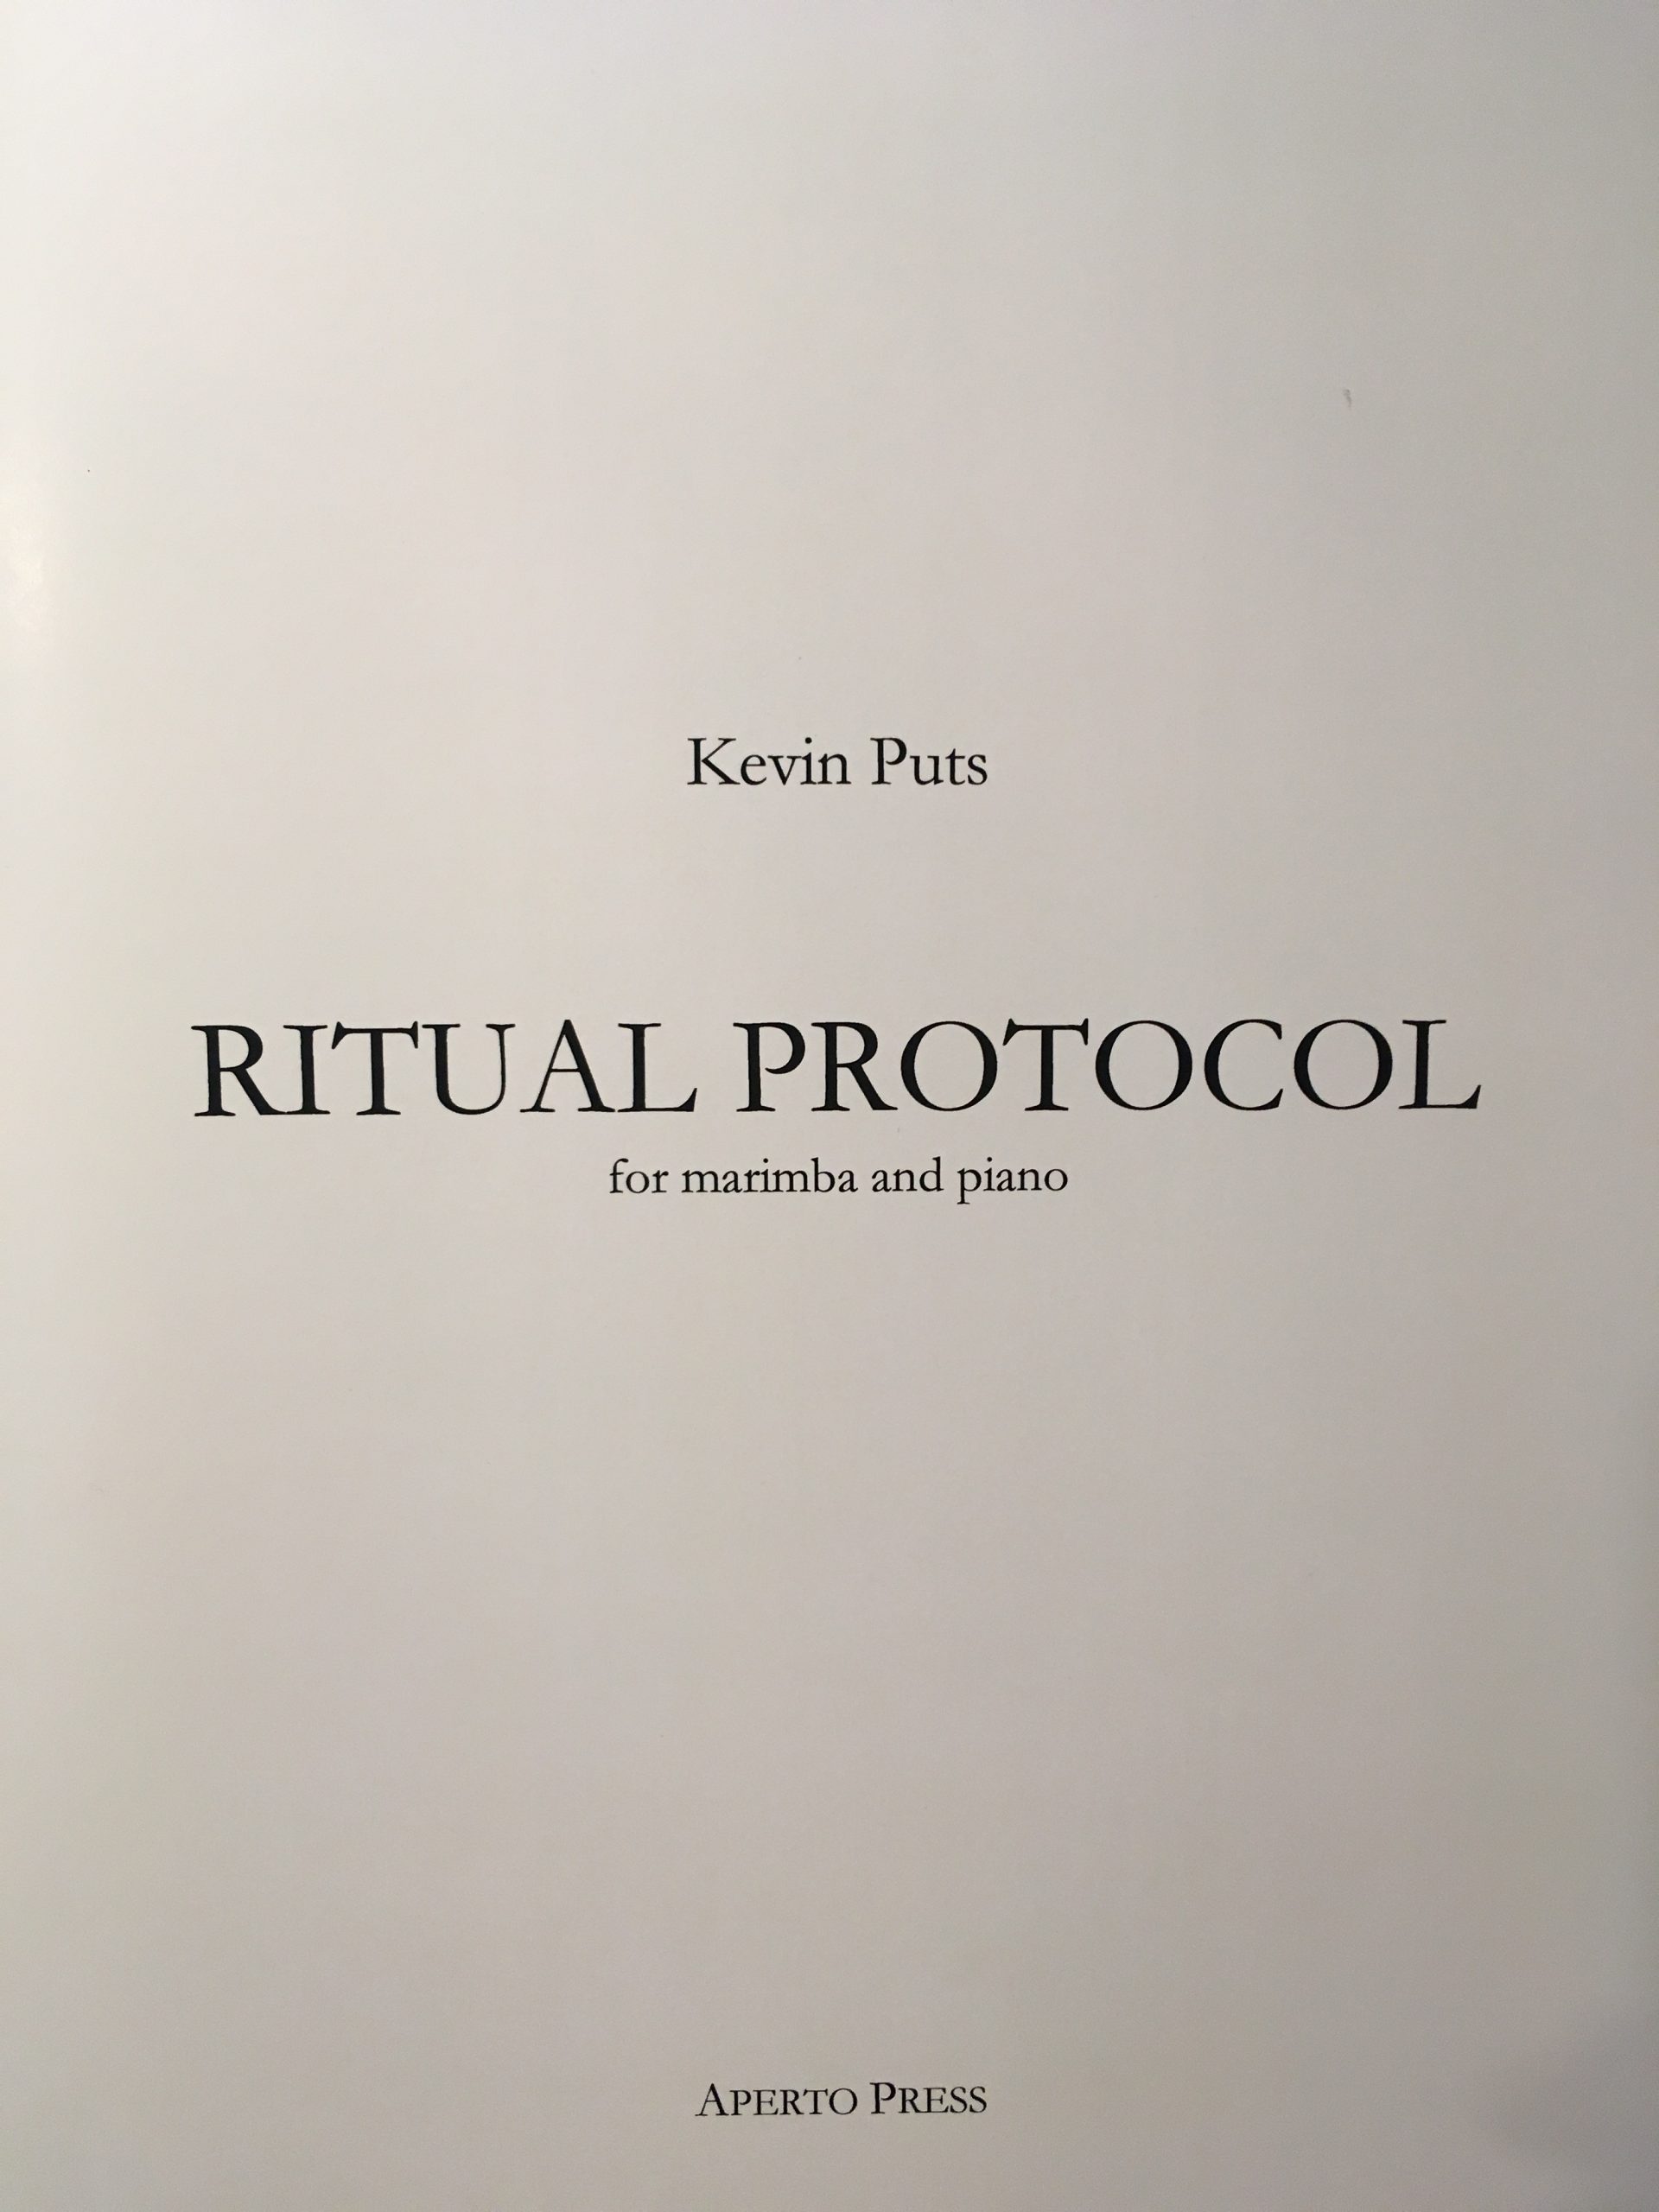 Ritual Protocol by Kevin Puts